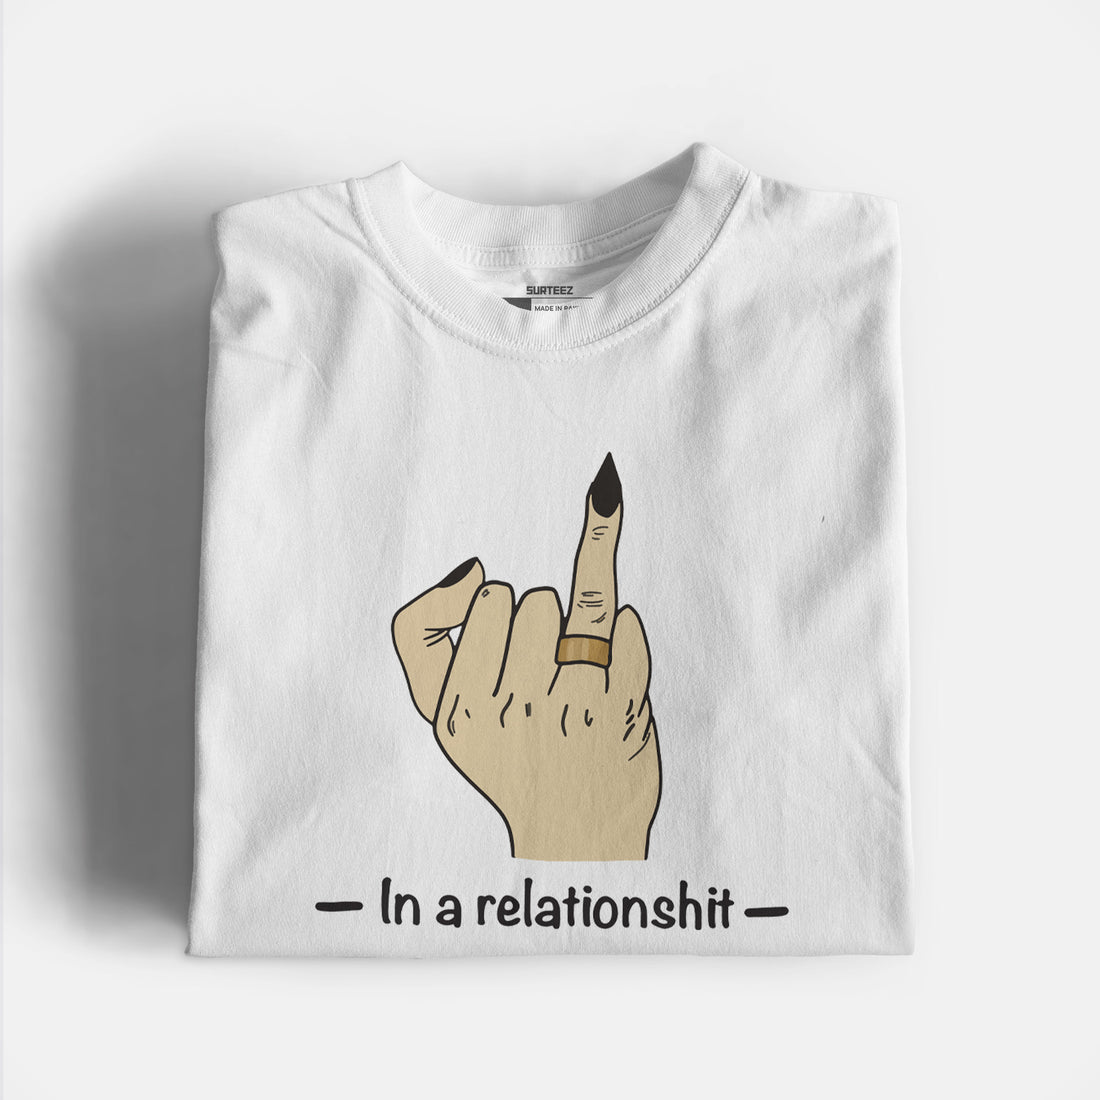 Relationshit Graphic Tee